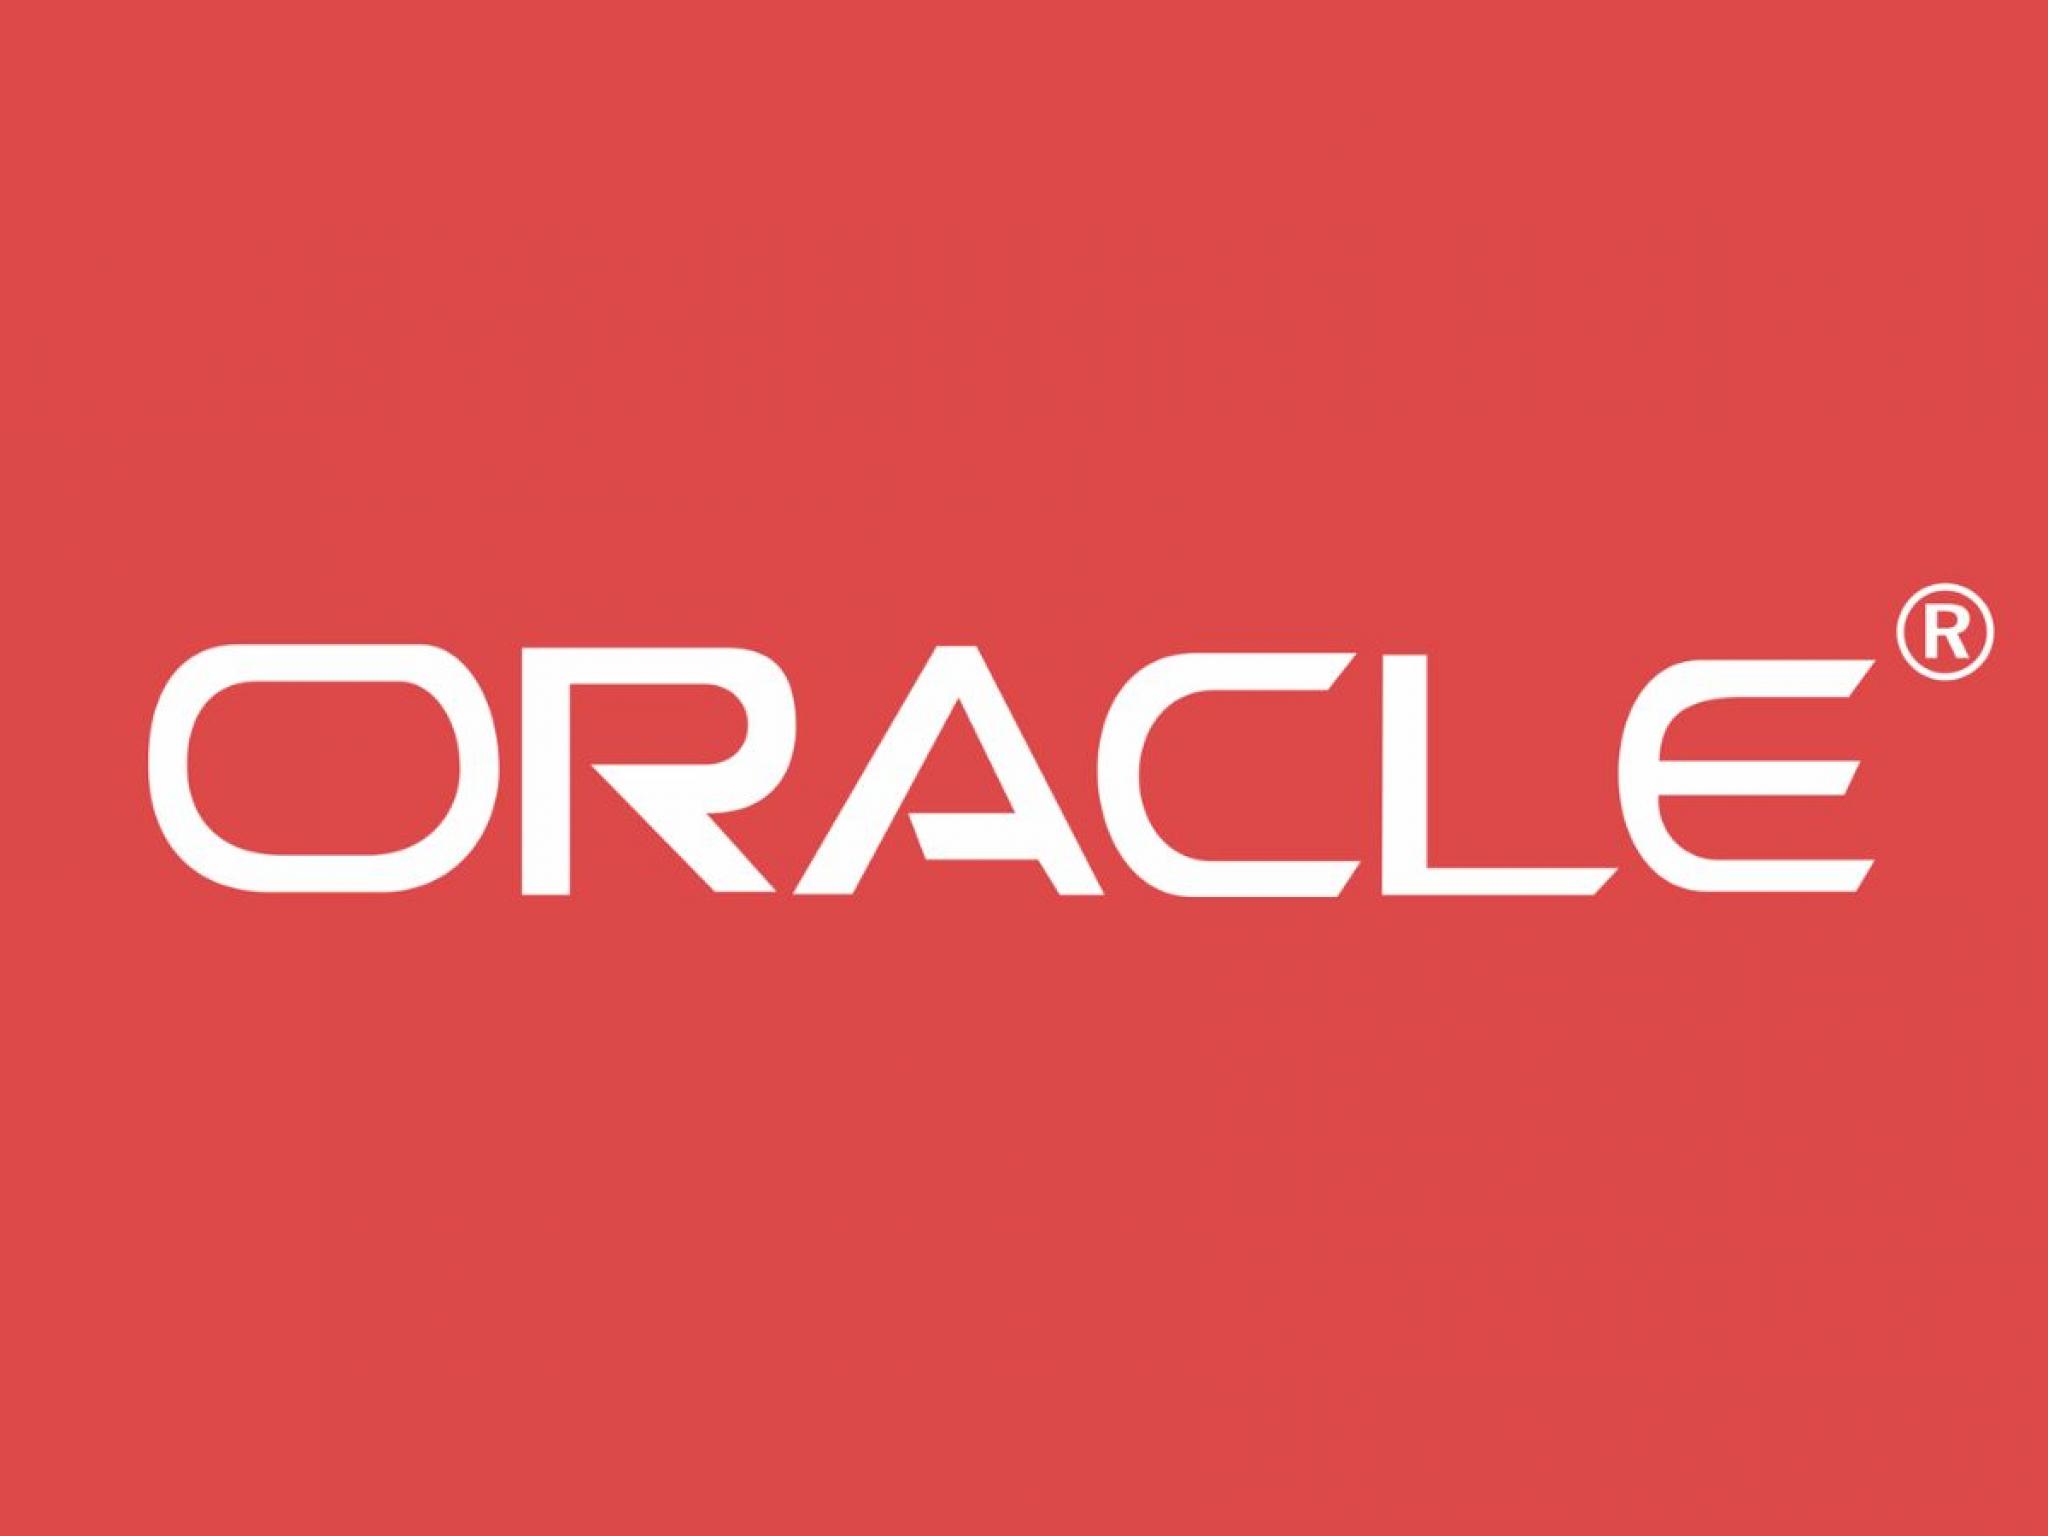  oracle-reports-weak-sales-joins-kinetik-lucid-group-and-other-big-stocks-moving-lower-in-tuesdays-pre-market-session 